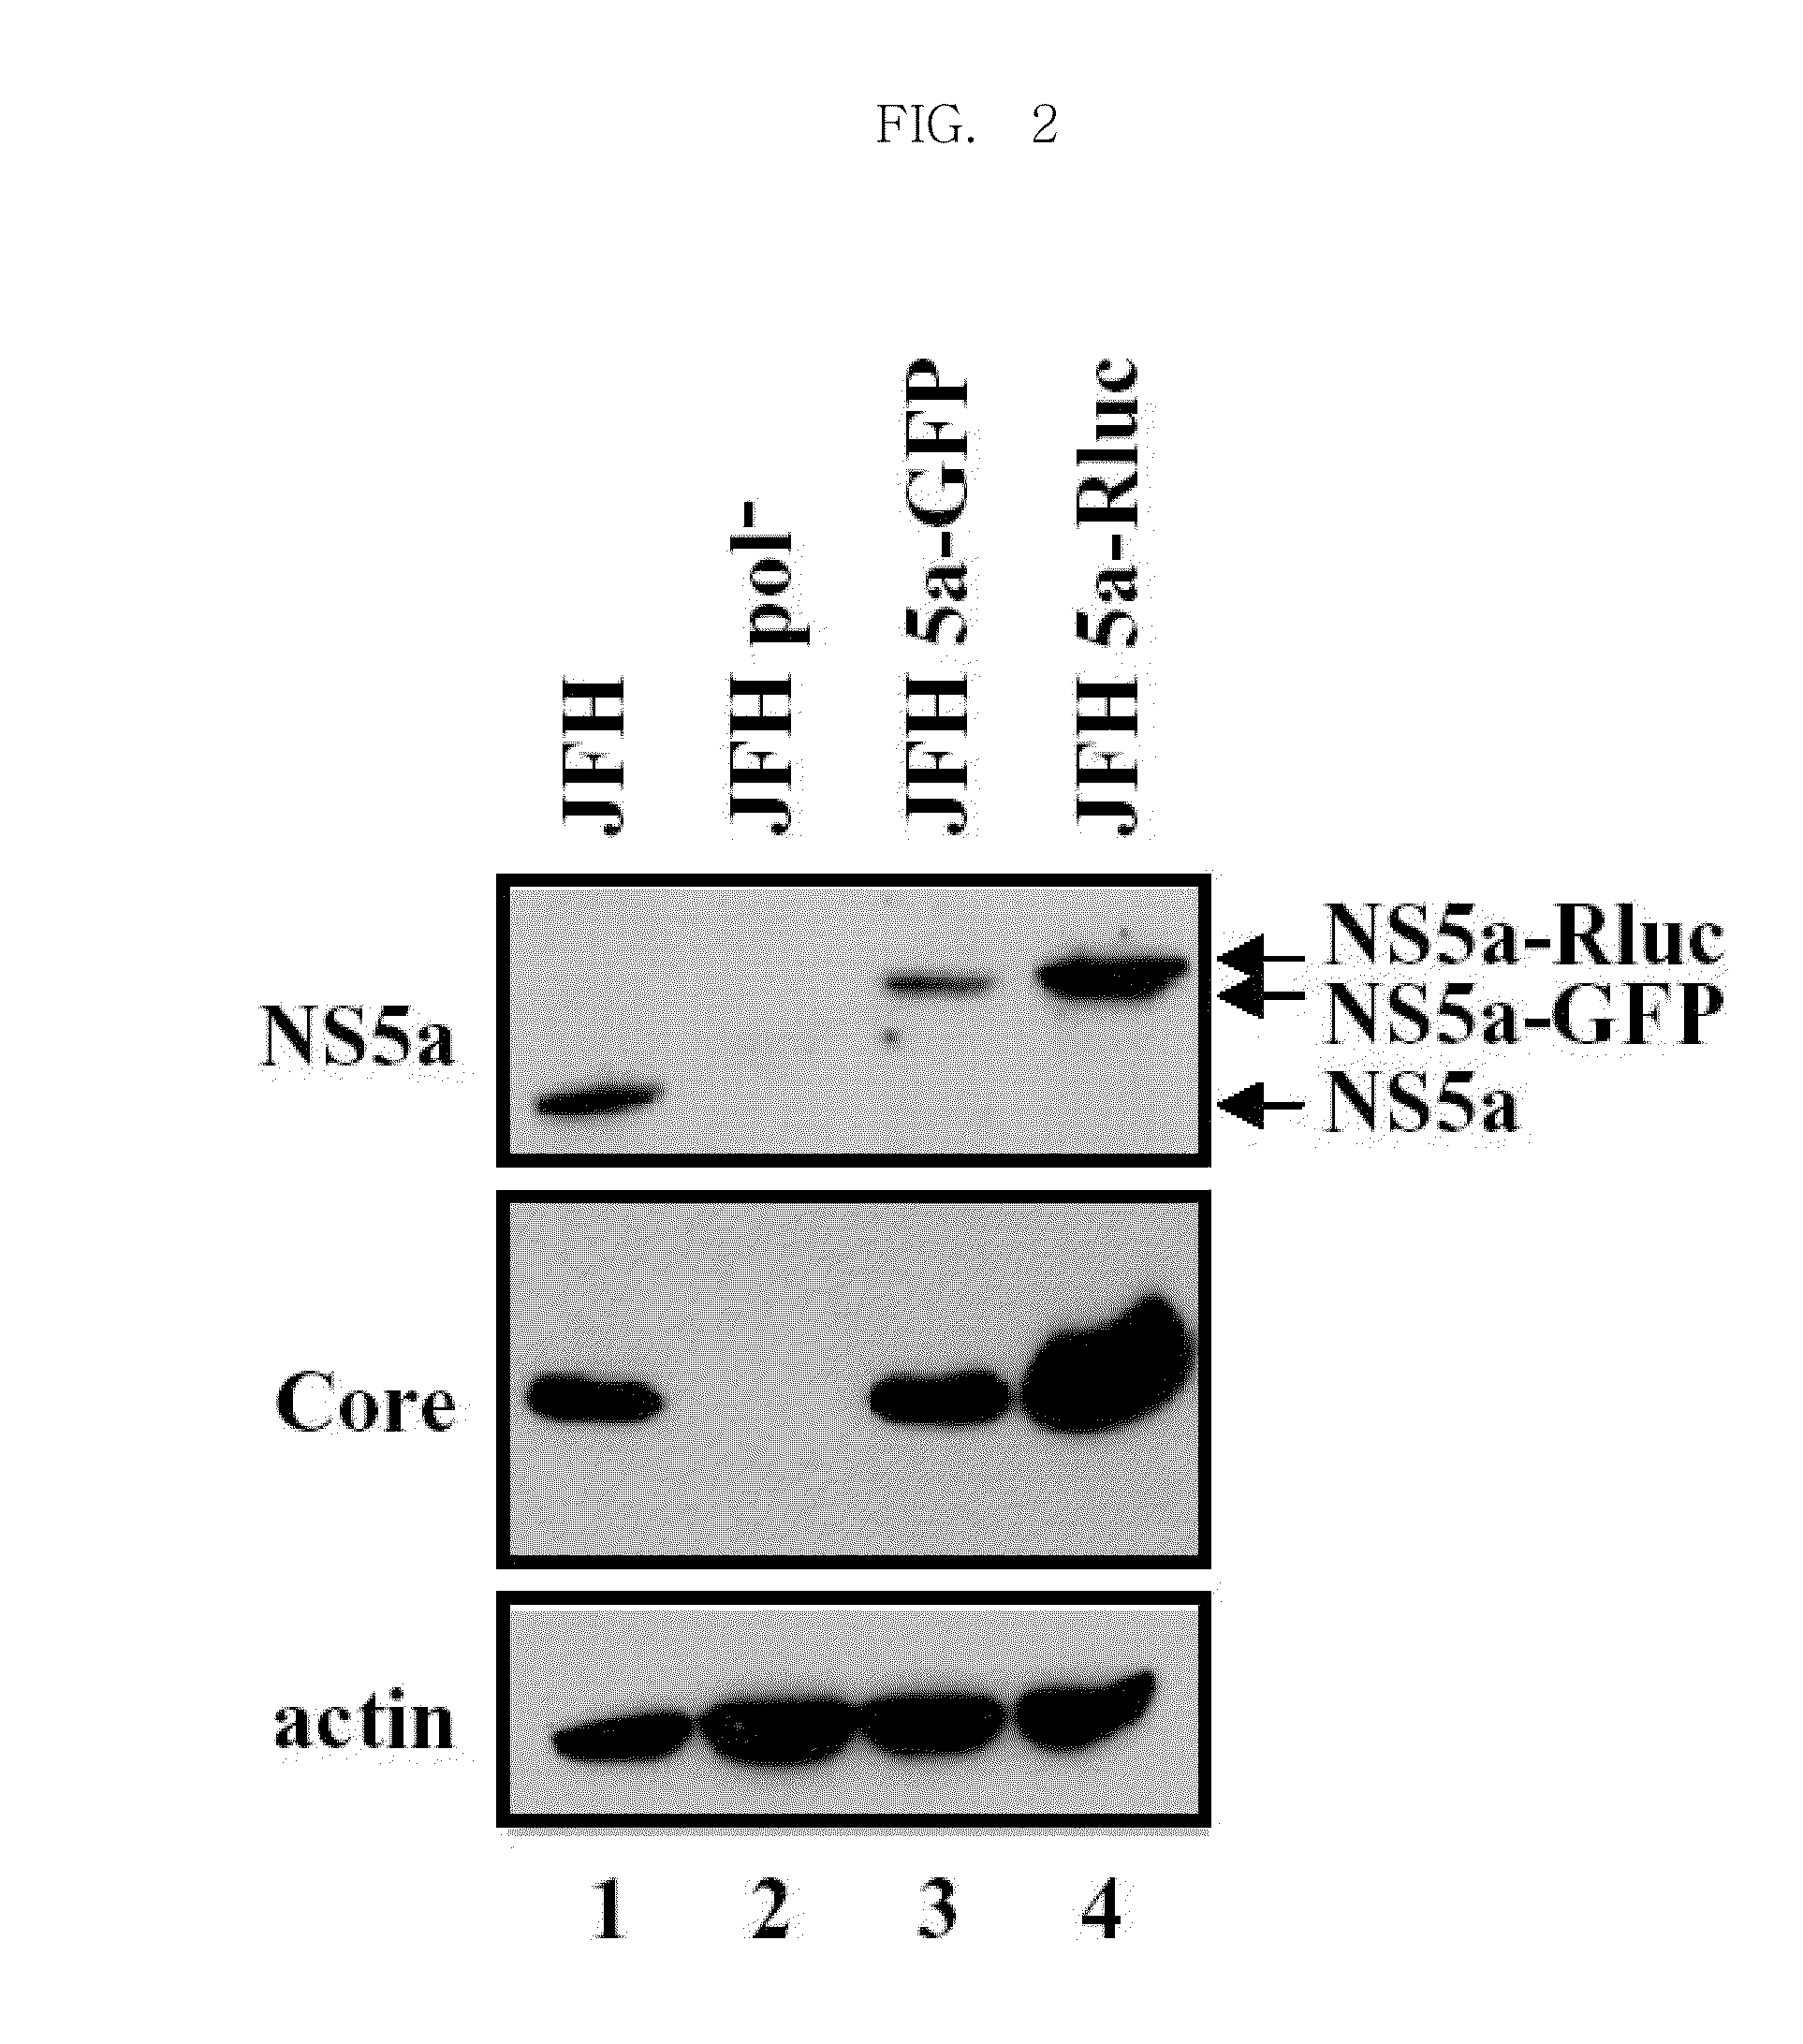 Efficiently replicable heptitis c virus mutant, a heptitis c virus mutant comprising reporter gene, a method of preparing of hcv vaccine using the same and a method of screening anti hcv composition using the same